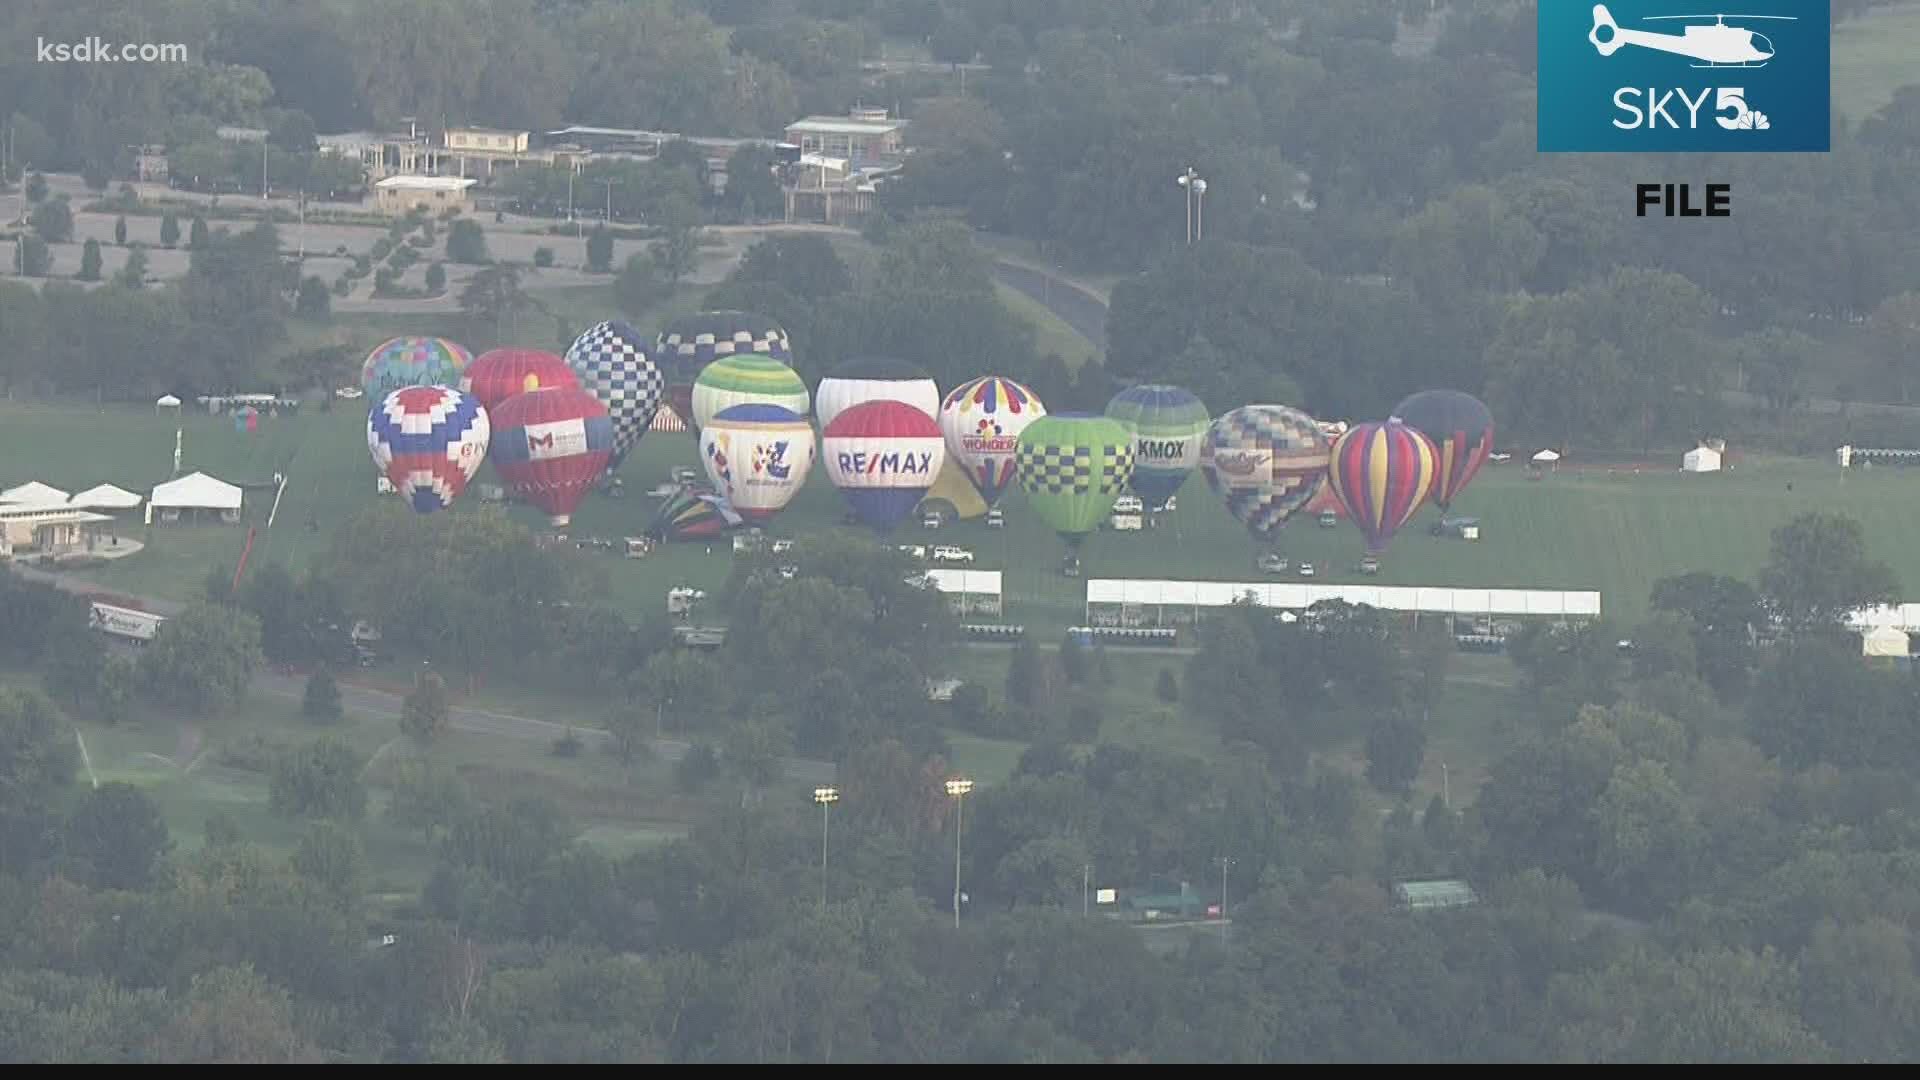 Race organizers canceled the event, but balloons will still fly in September to celebrate essential workers